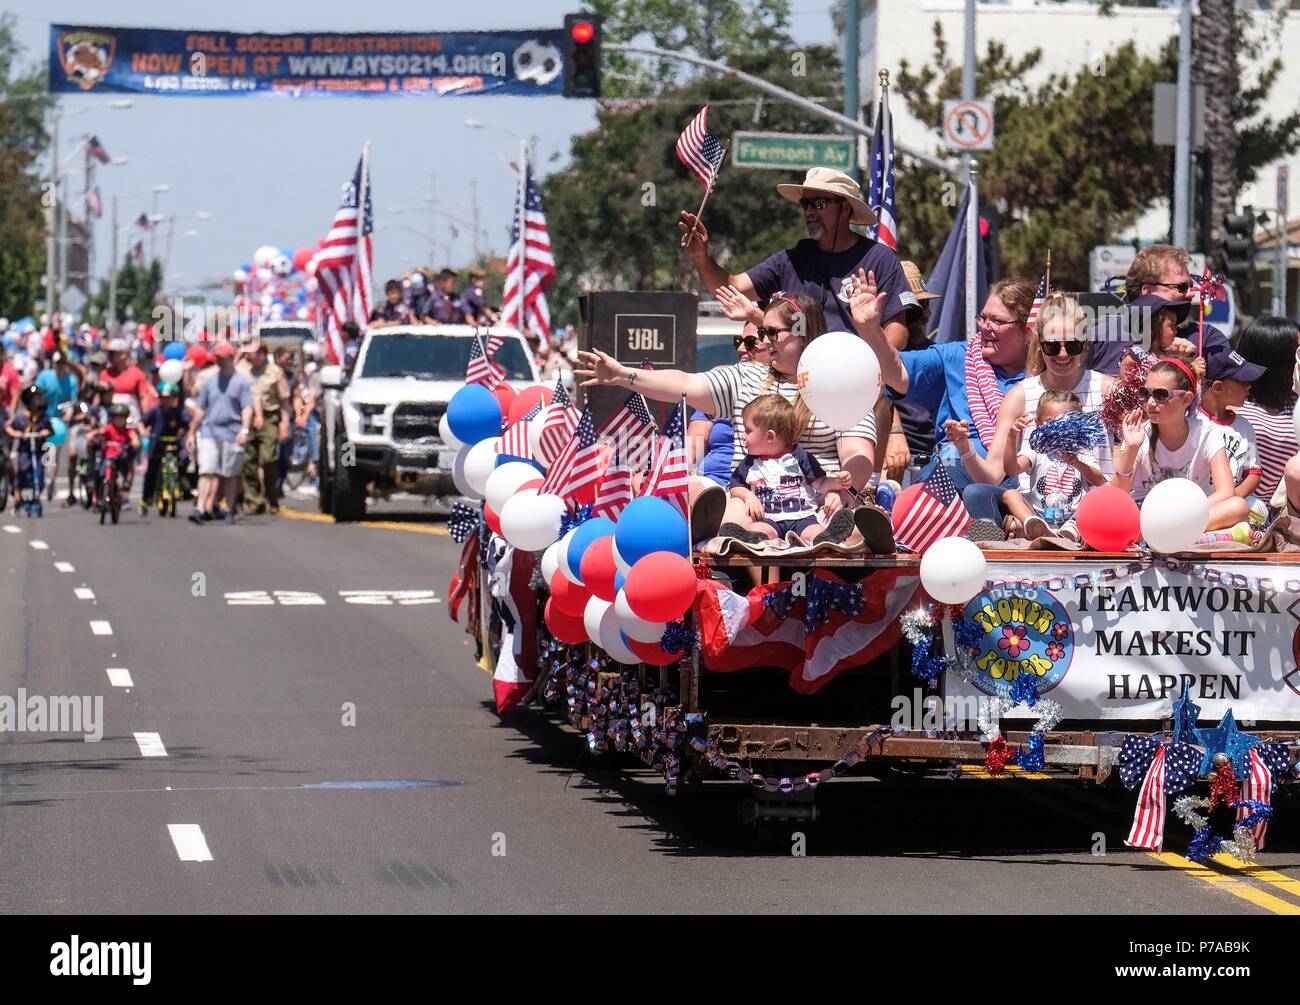 Los Angeles, USA. 4th July, 2018. Participants wave to the crowd during